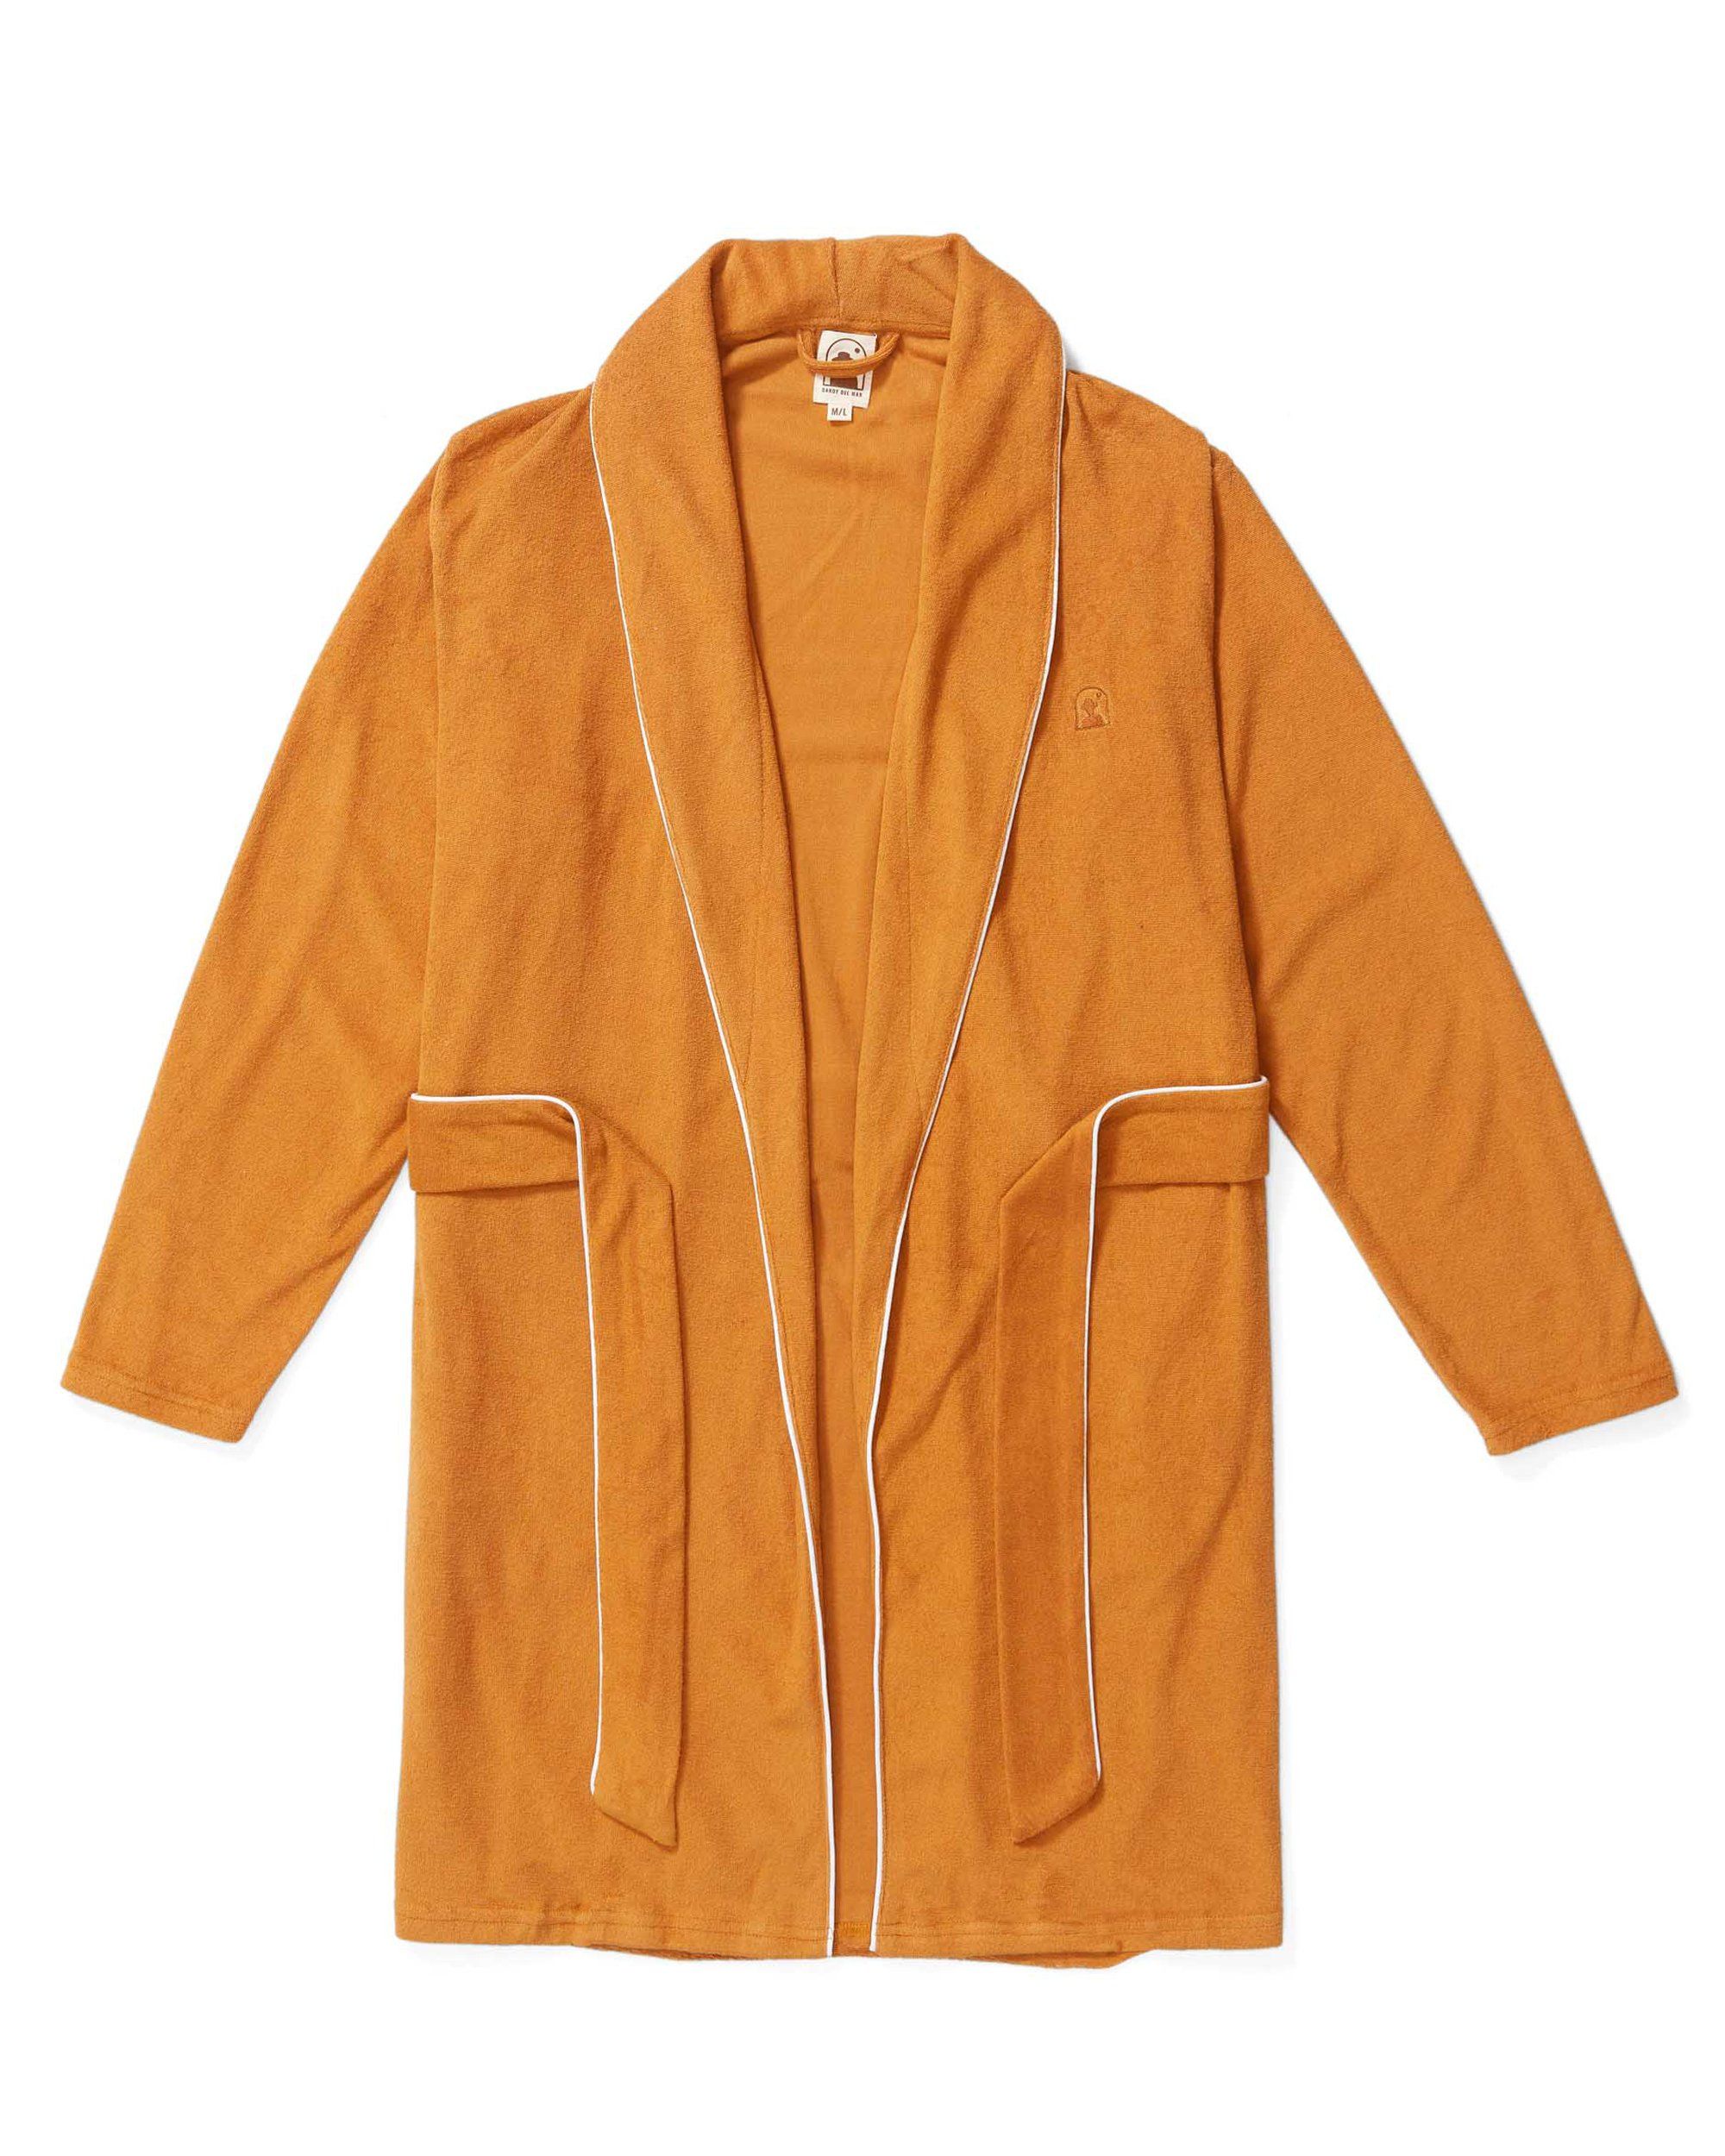 Image of The Tropez Terry Cloth Robe - Burnt Sienna